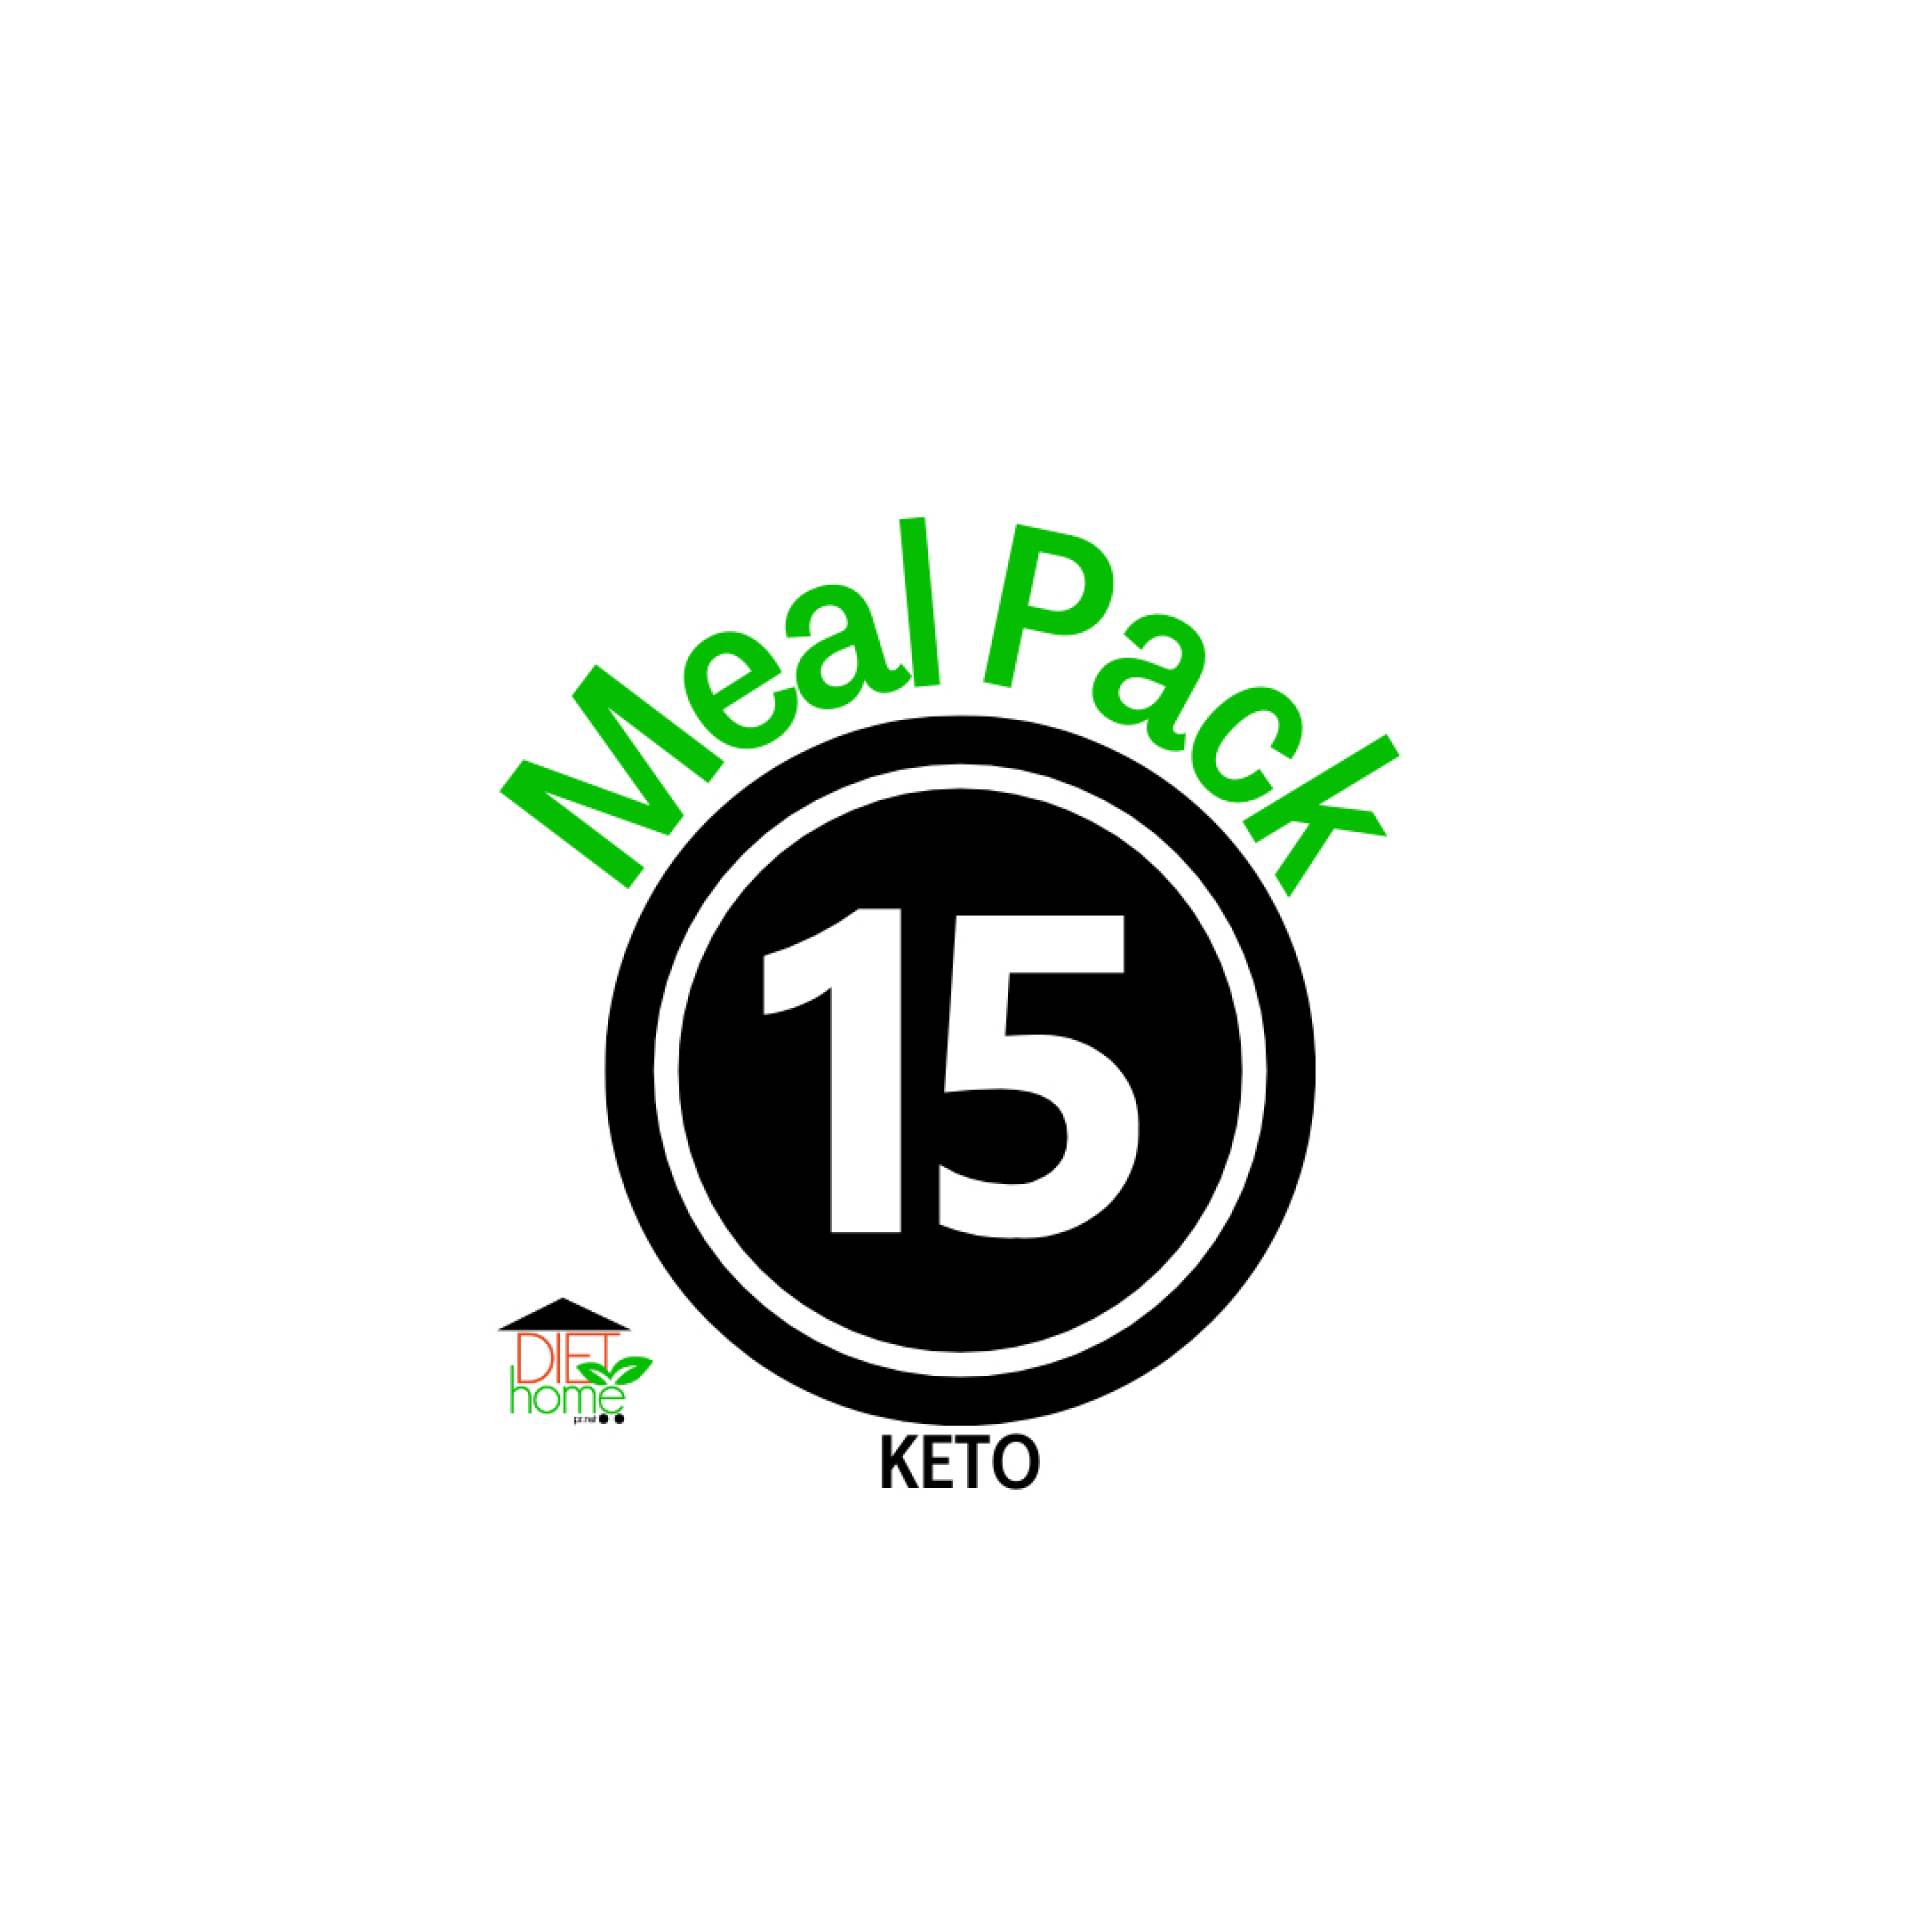 *15 Meal Pack Keto